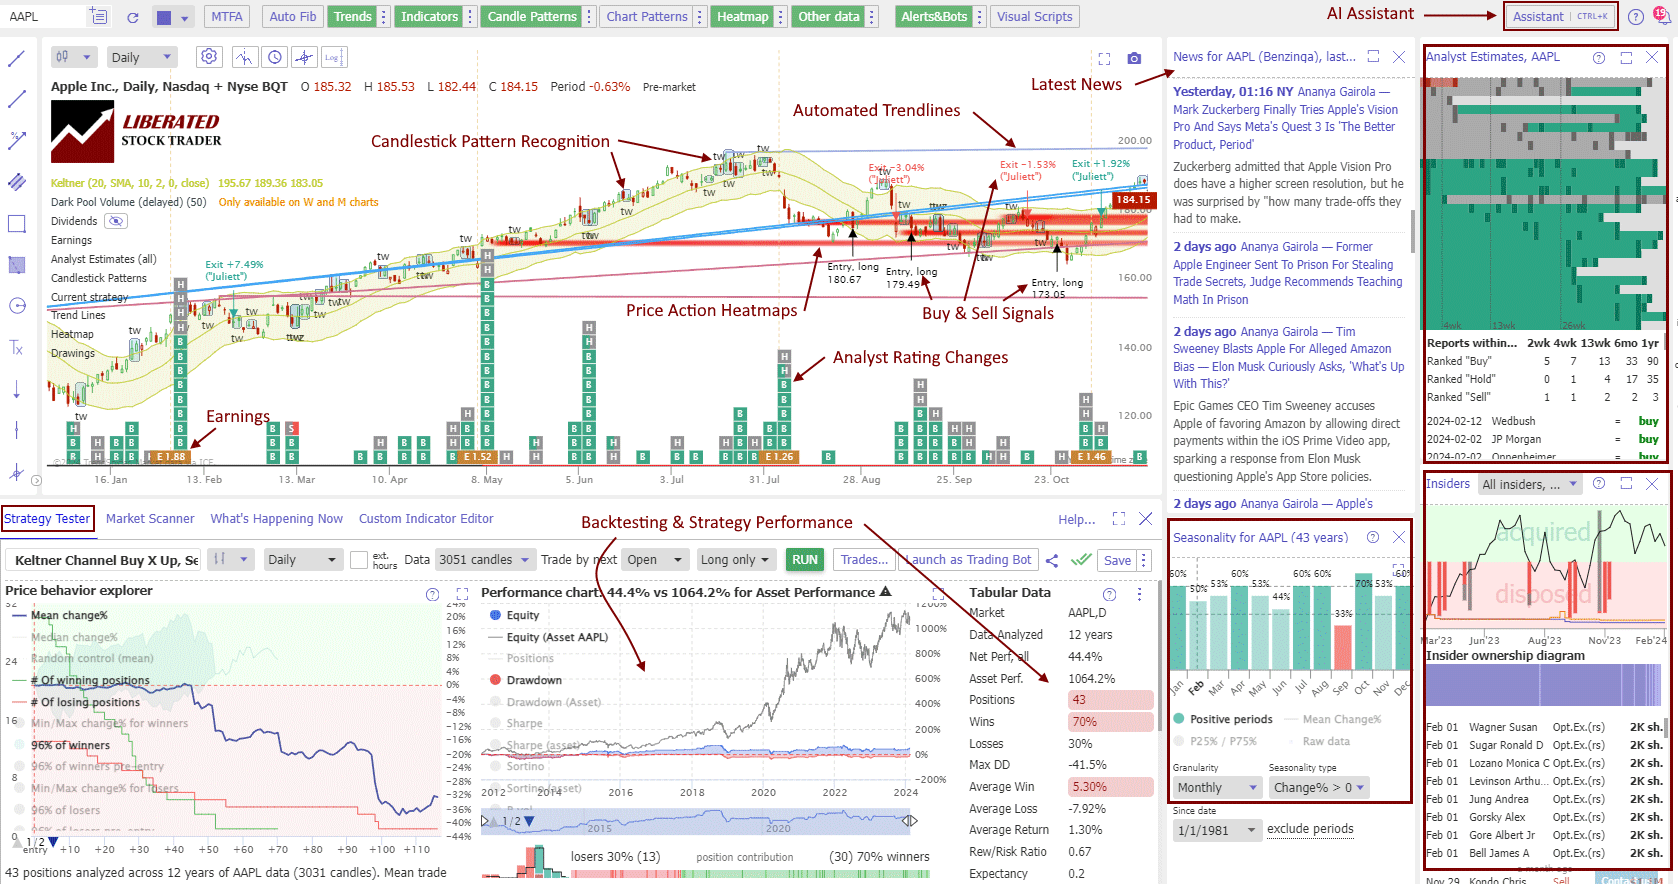 Key TrendSpider features in one screenshot: Backtesting, Screening for price, indicators, news, analyst ratings, seasonality, and insider trading.